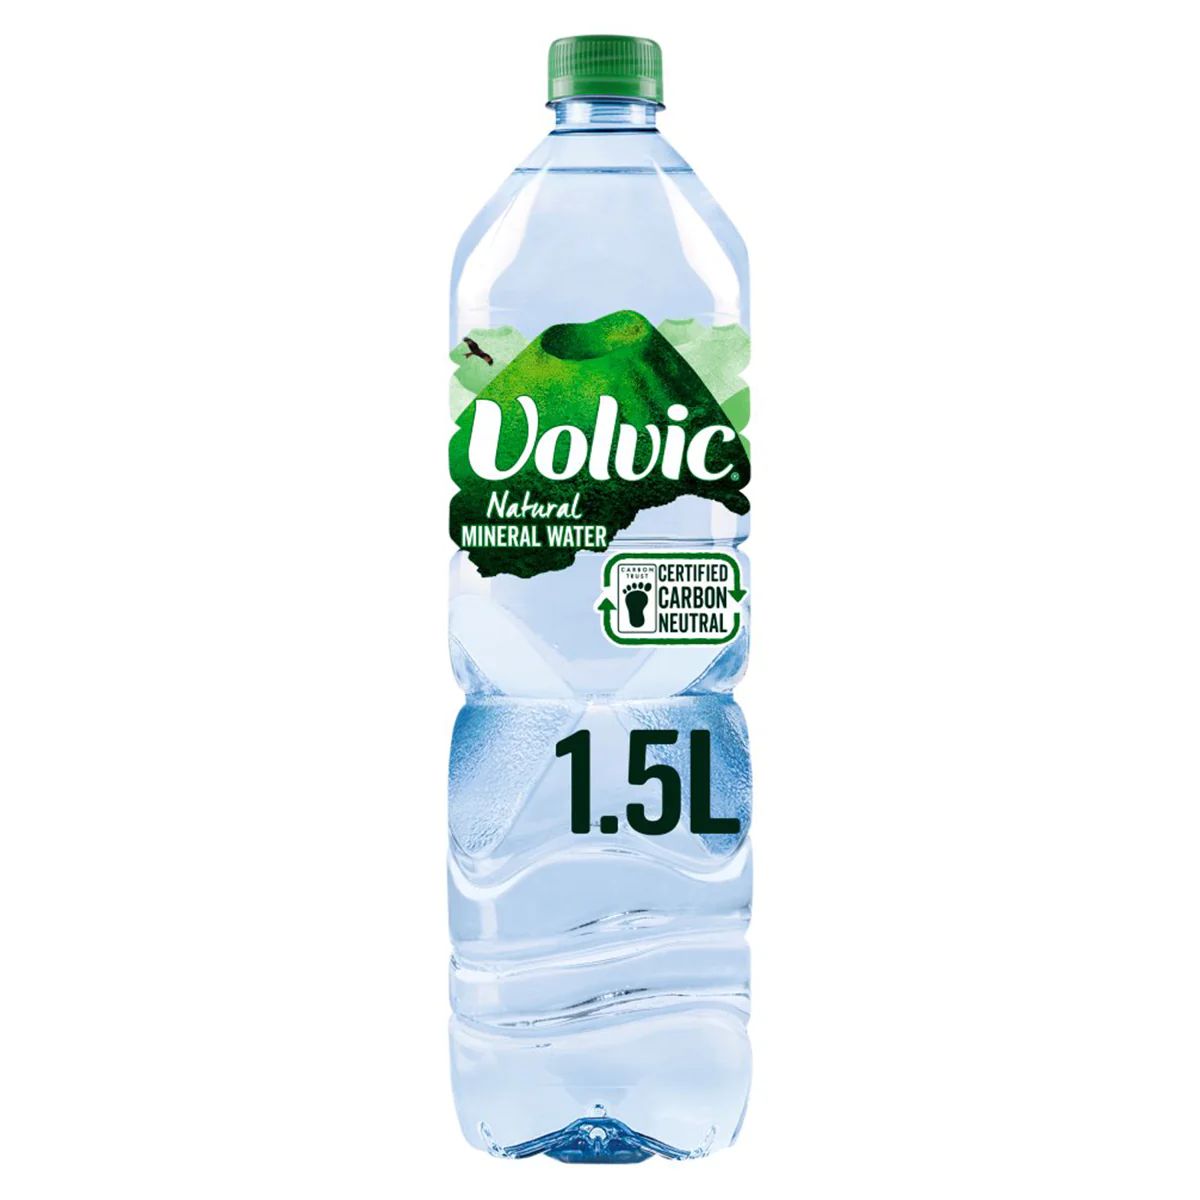 A Volvic - Natural Mineral Water - 1.5L.